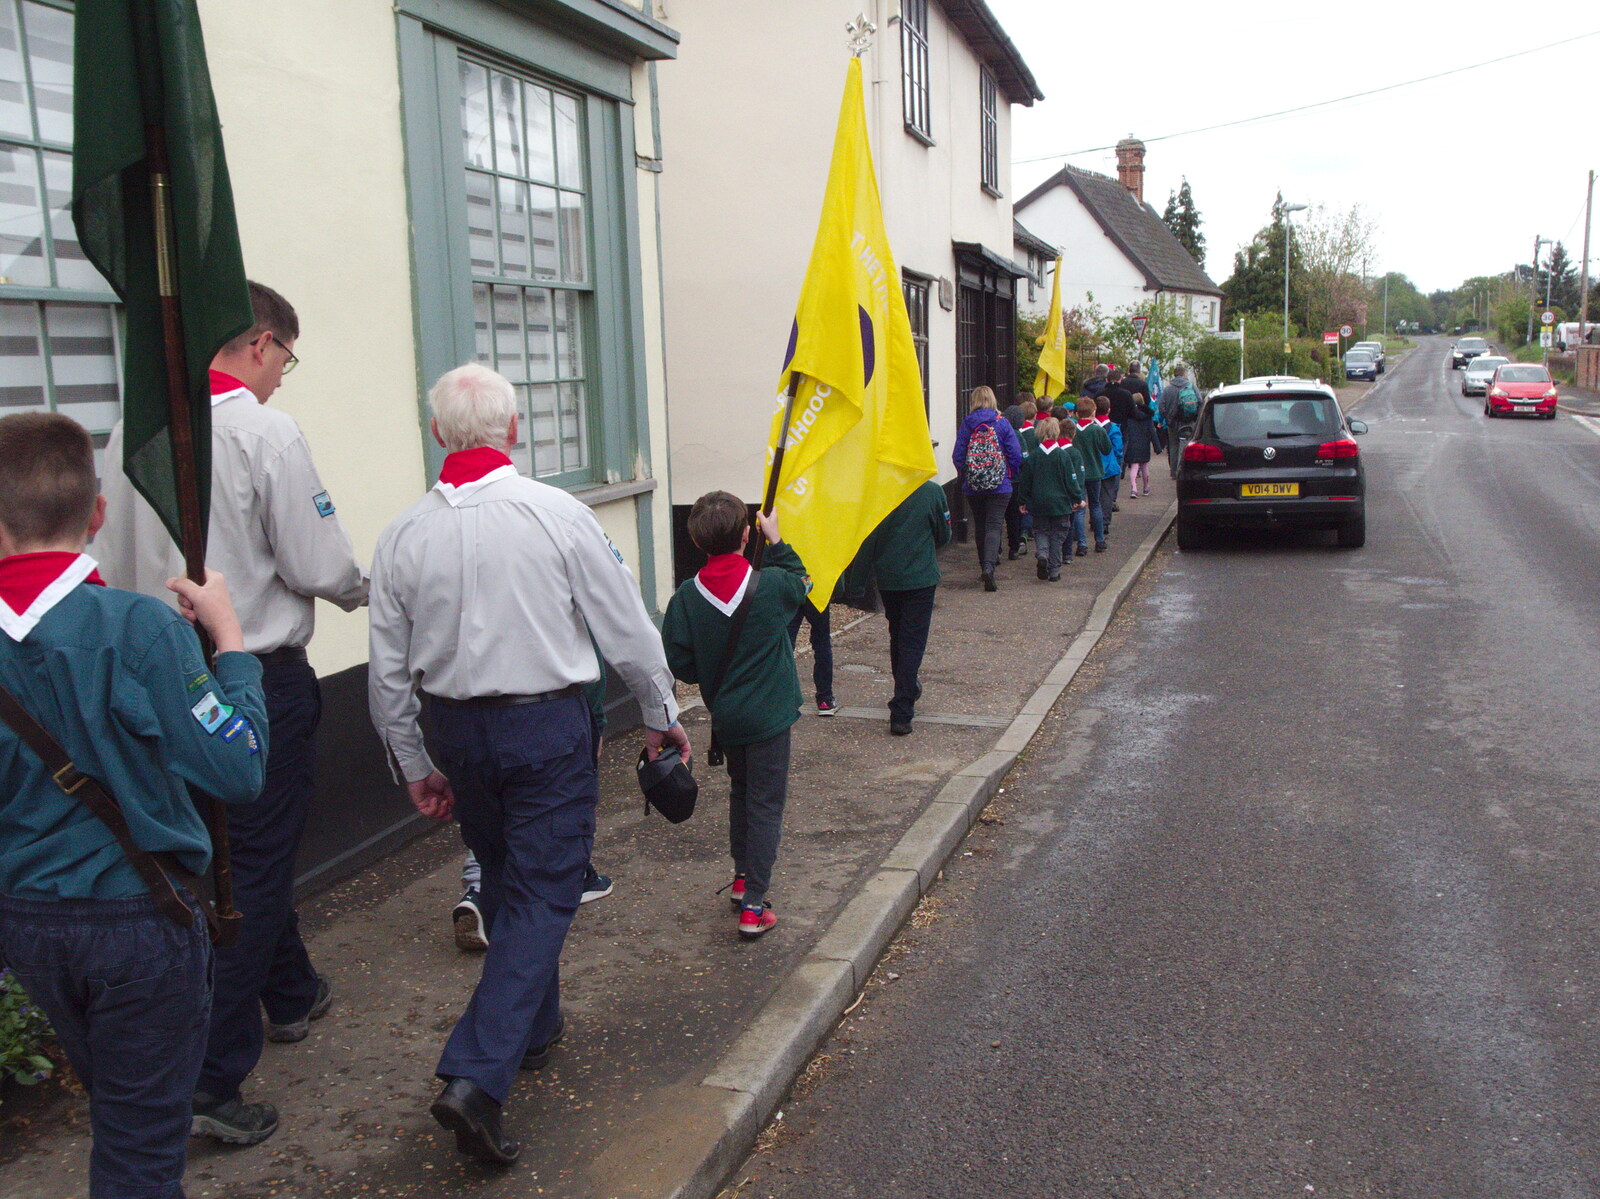 The Scouts carry their flags from the Scout hut from A St. George's Day Parade, Dickleburgh, Norfolk - 28th April 2019